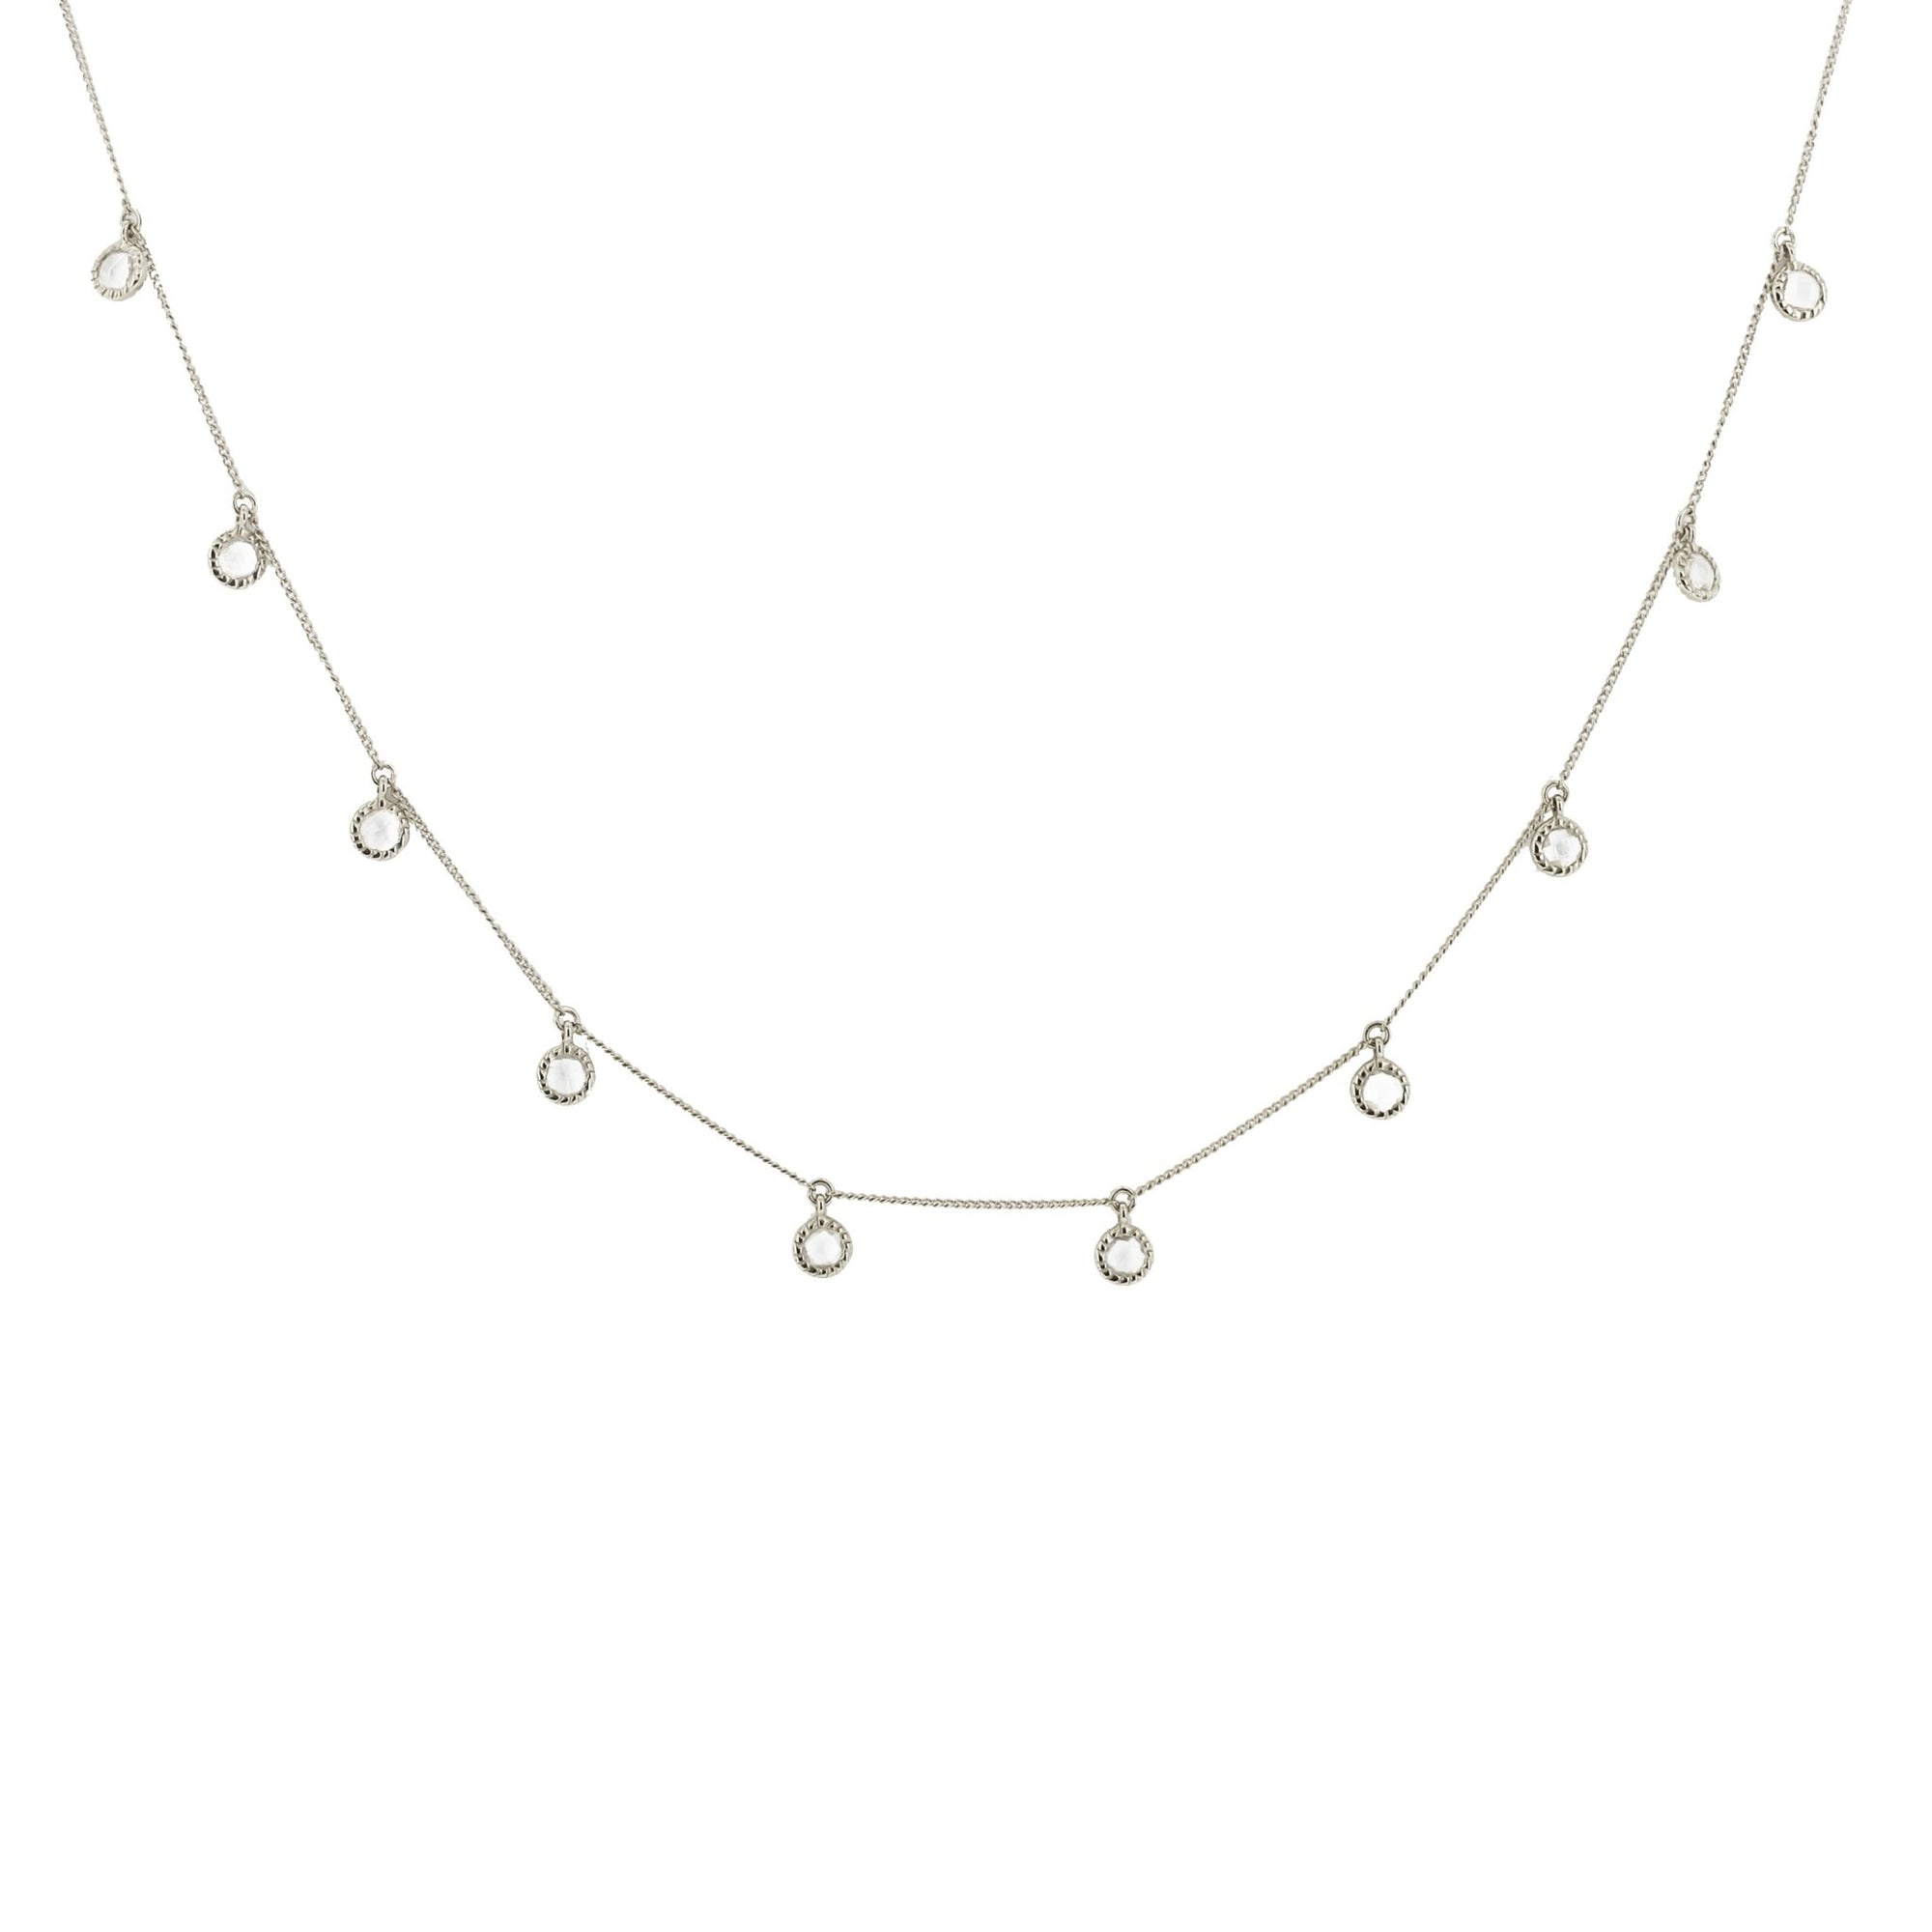 DAINTY LEGACY COLLAR NECKLACE - WHITE TOPAZ & SILVER - SO PRETTY CARA COTTER